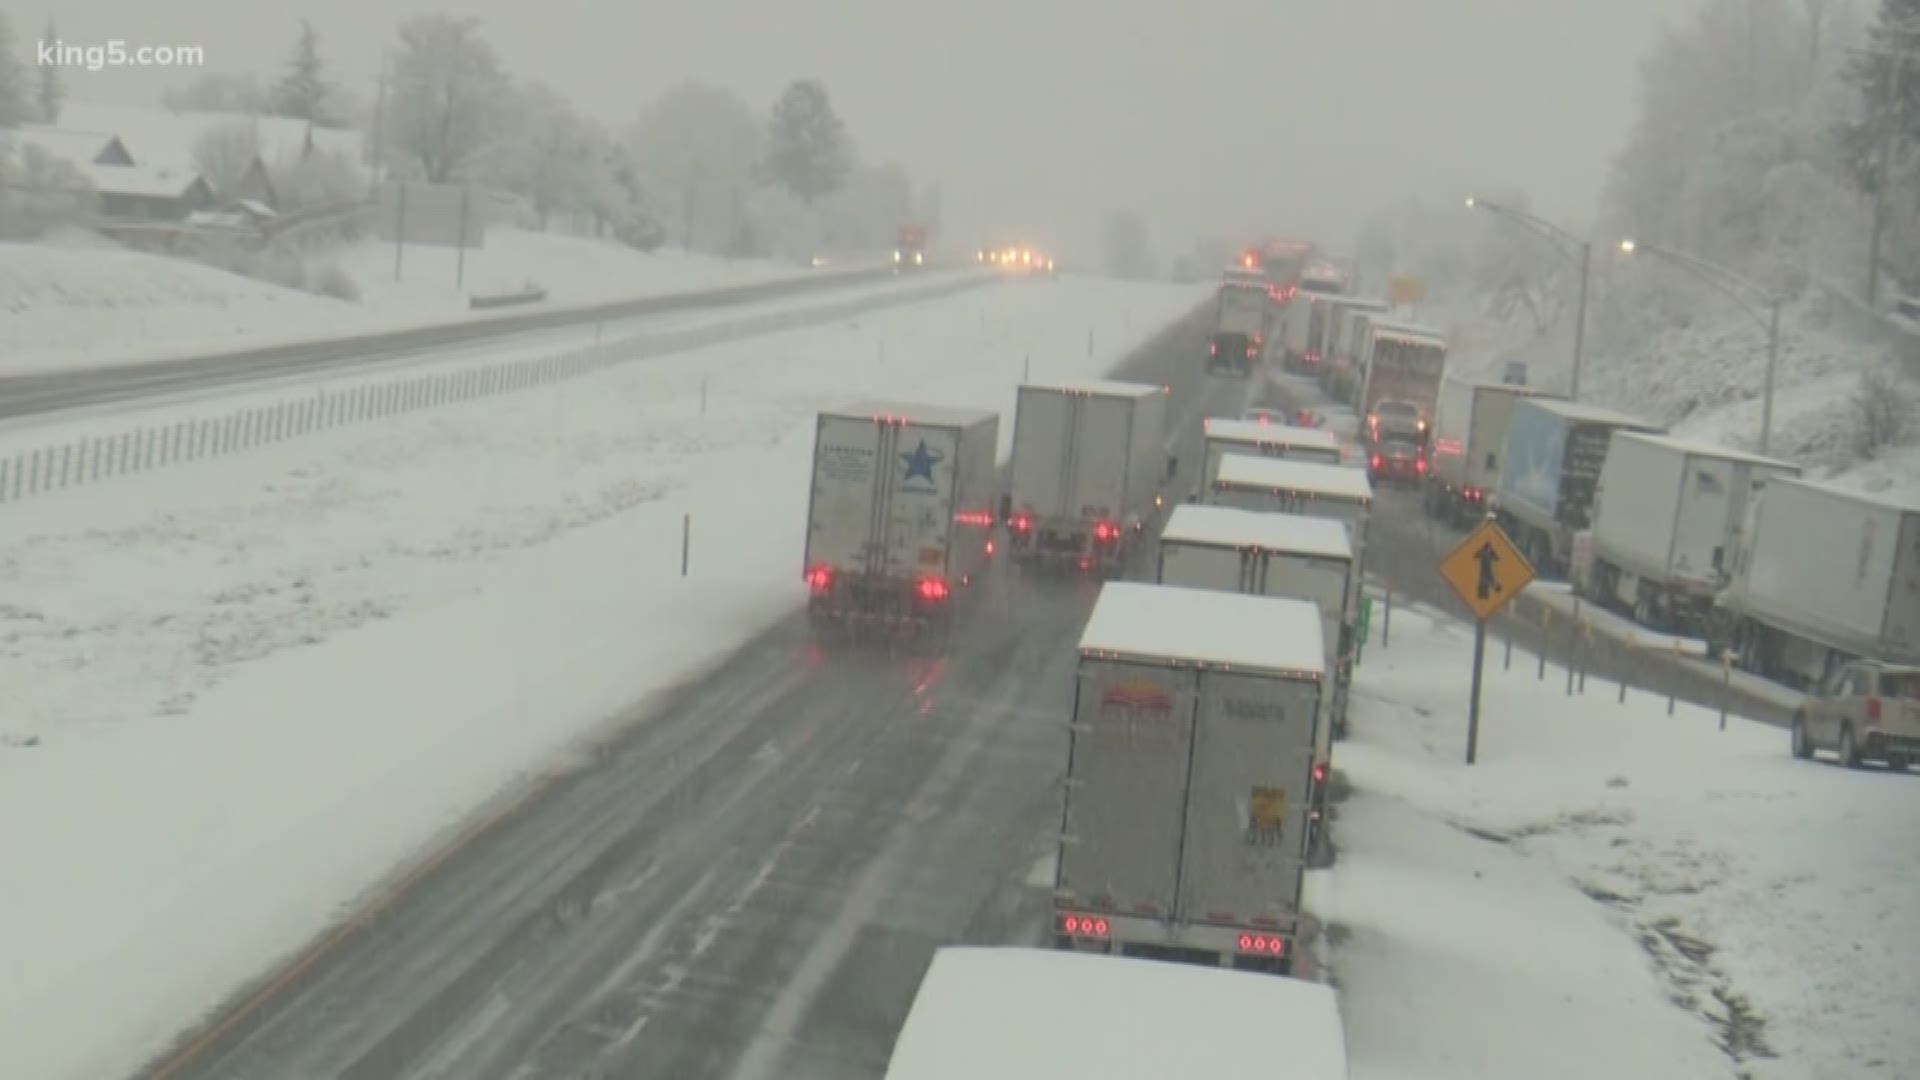 tens of thousands of travelers are bracing for busy roads, cold weather and in some places, winter driving conditions.